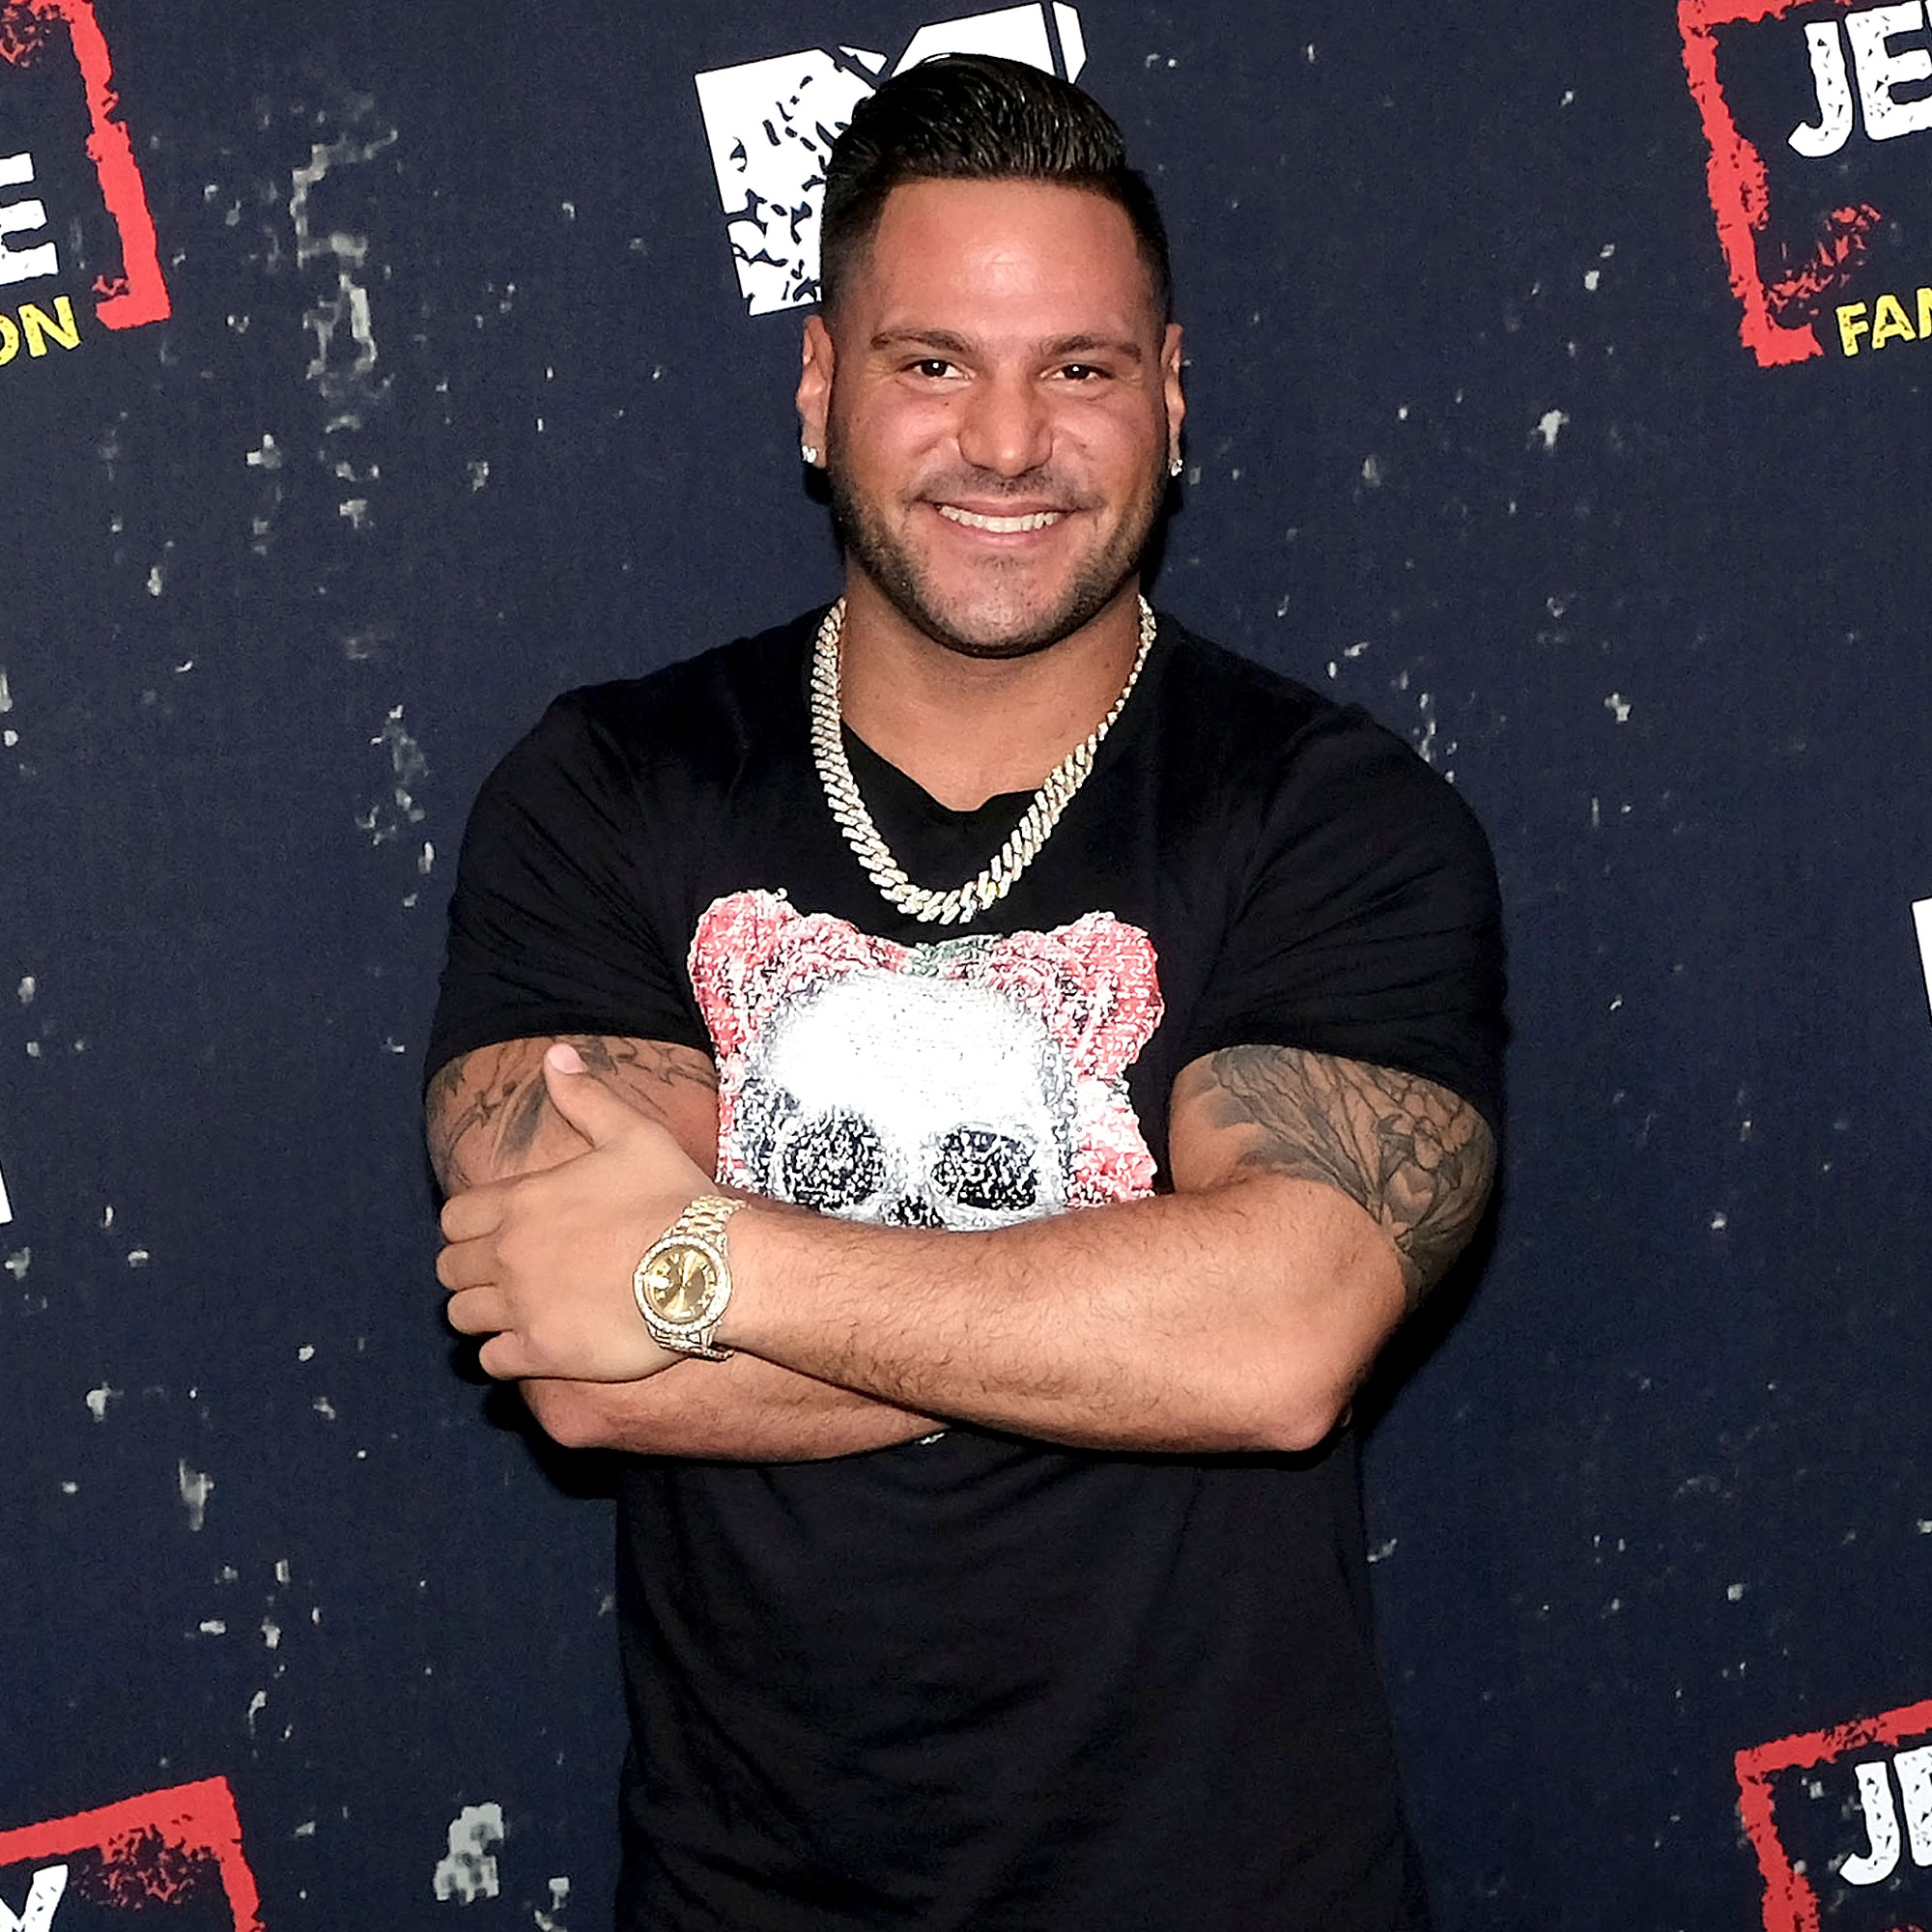 Ronnie Ortiz-Magro to 'Step Away' From 'Jersey Shore' After Arrest